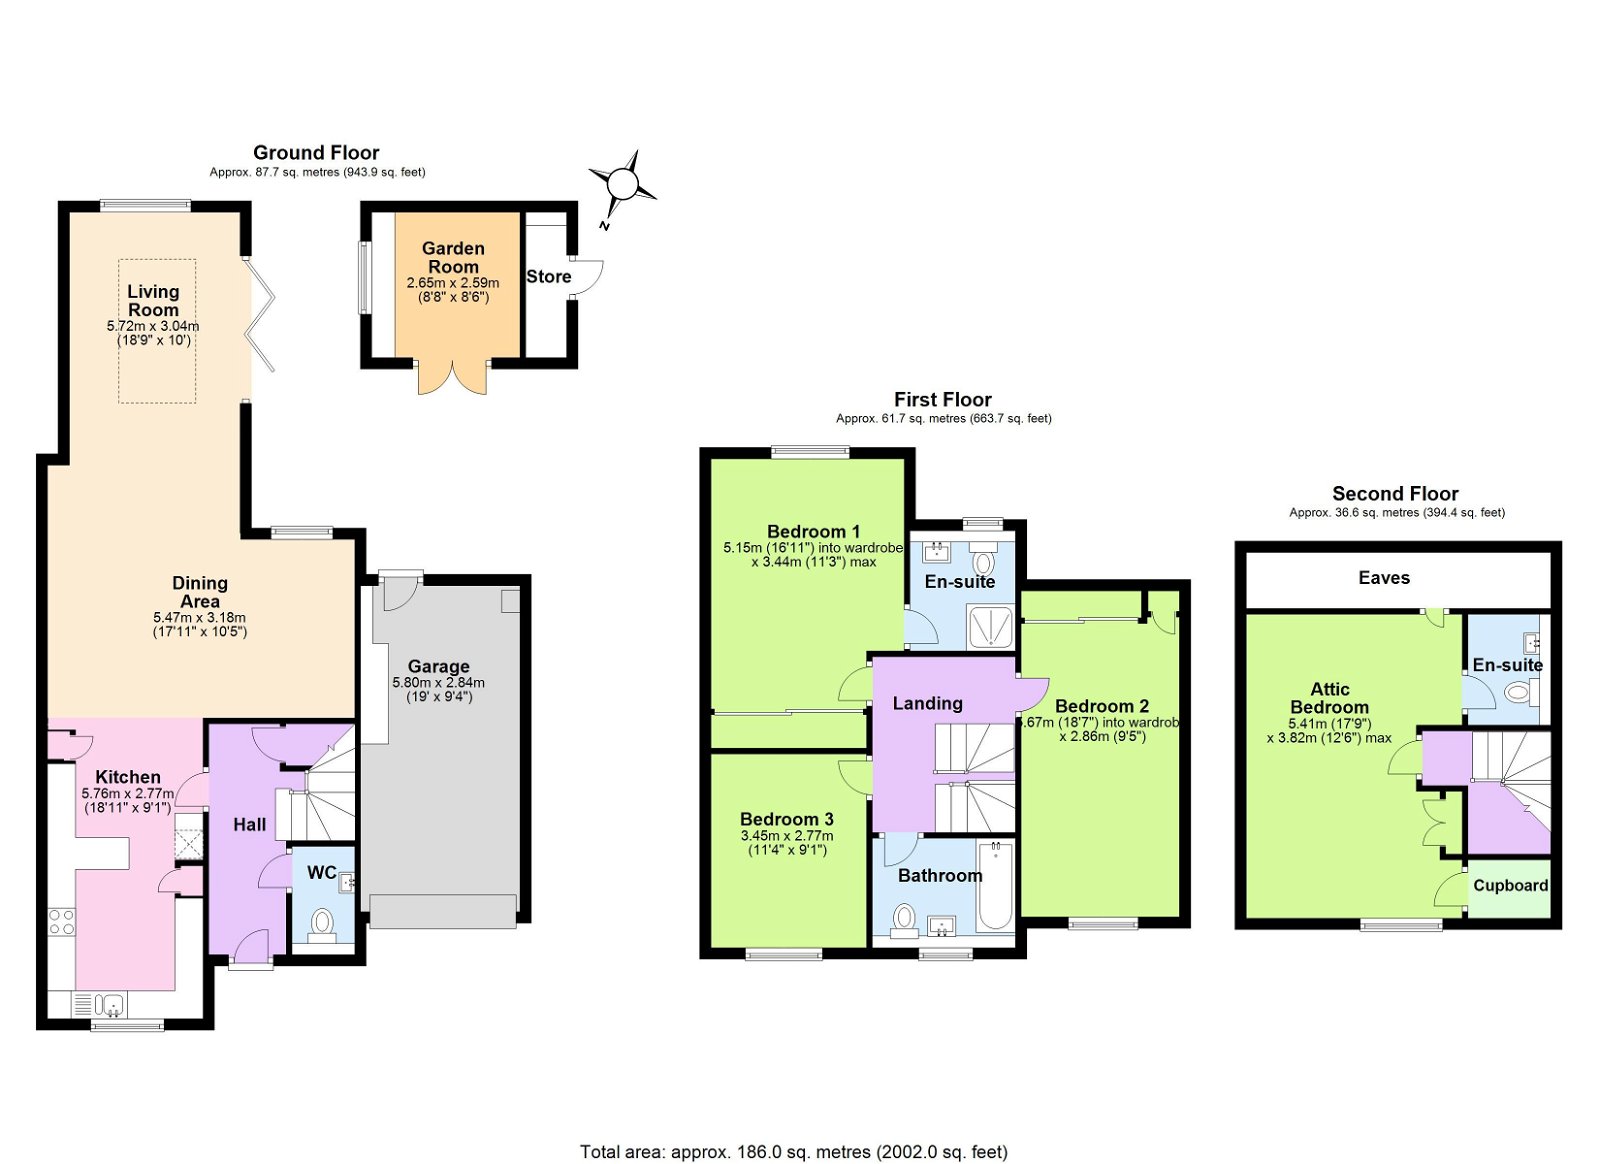 Floorplans For Within Easy Reach to Cranbrook Shops & Schools